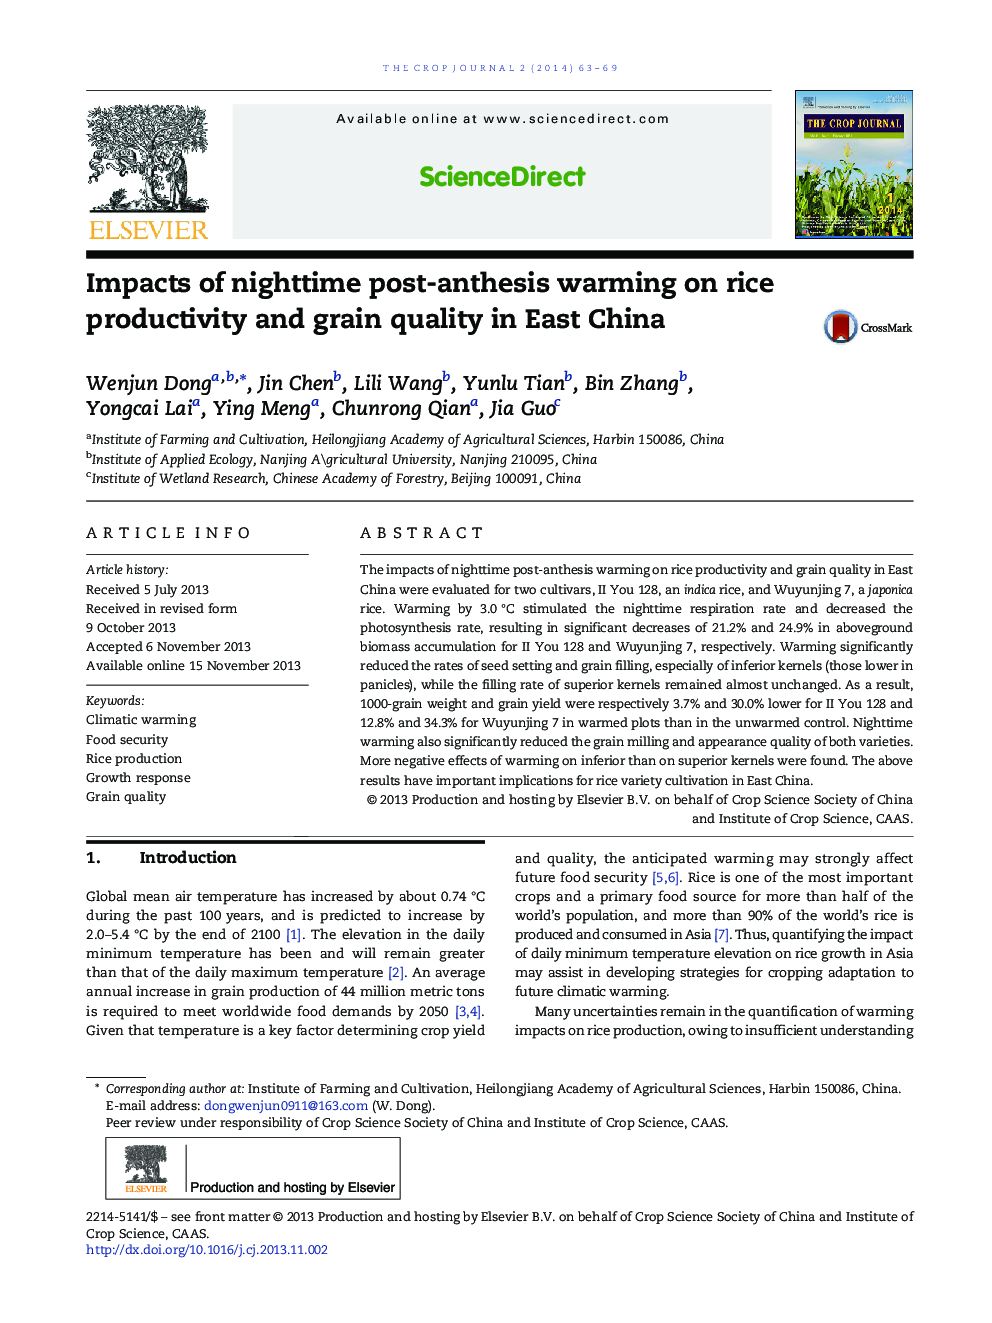 Impacts of nighttime post-anthesis warming on rice productivity and grain quality in East China 